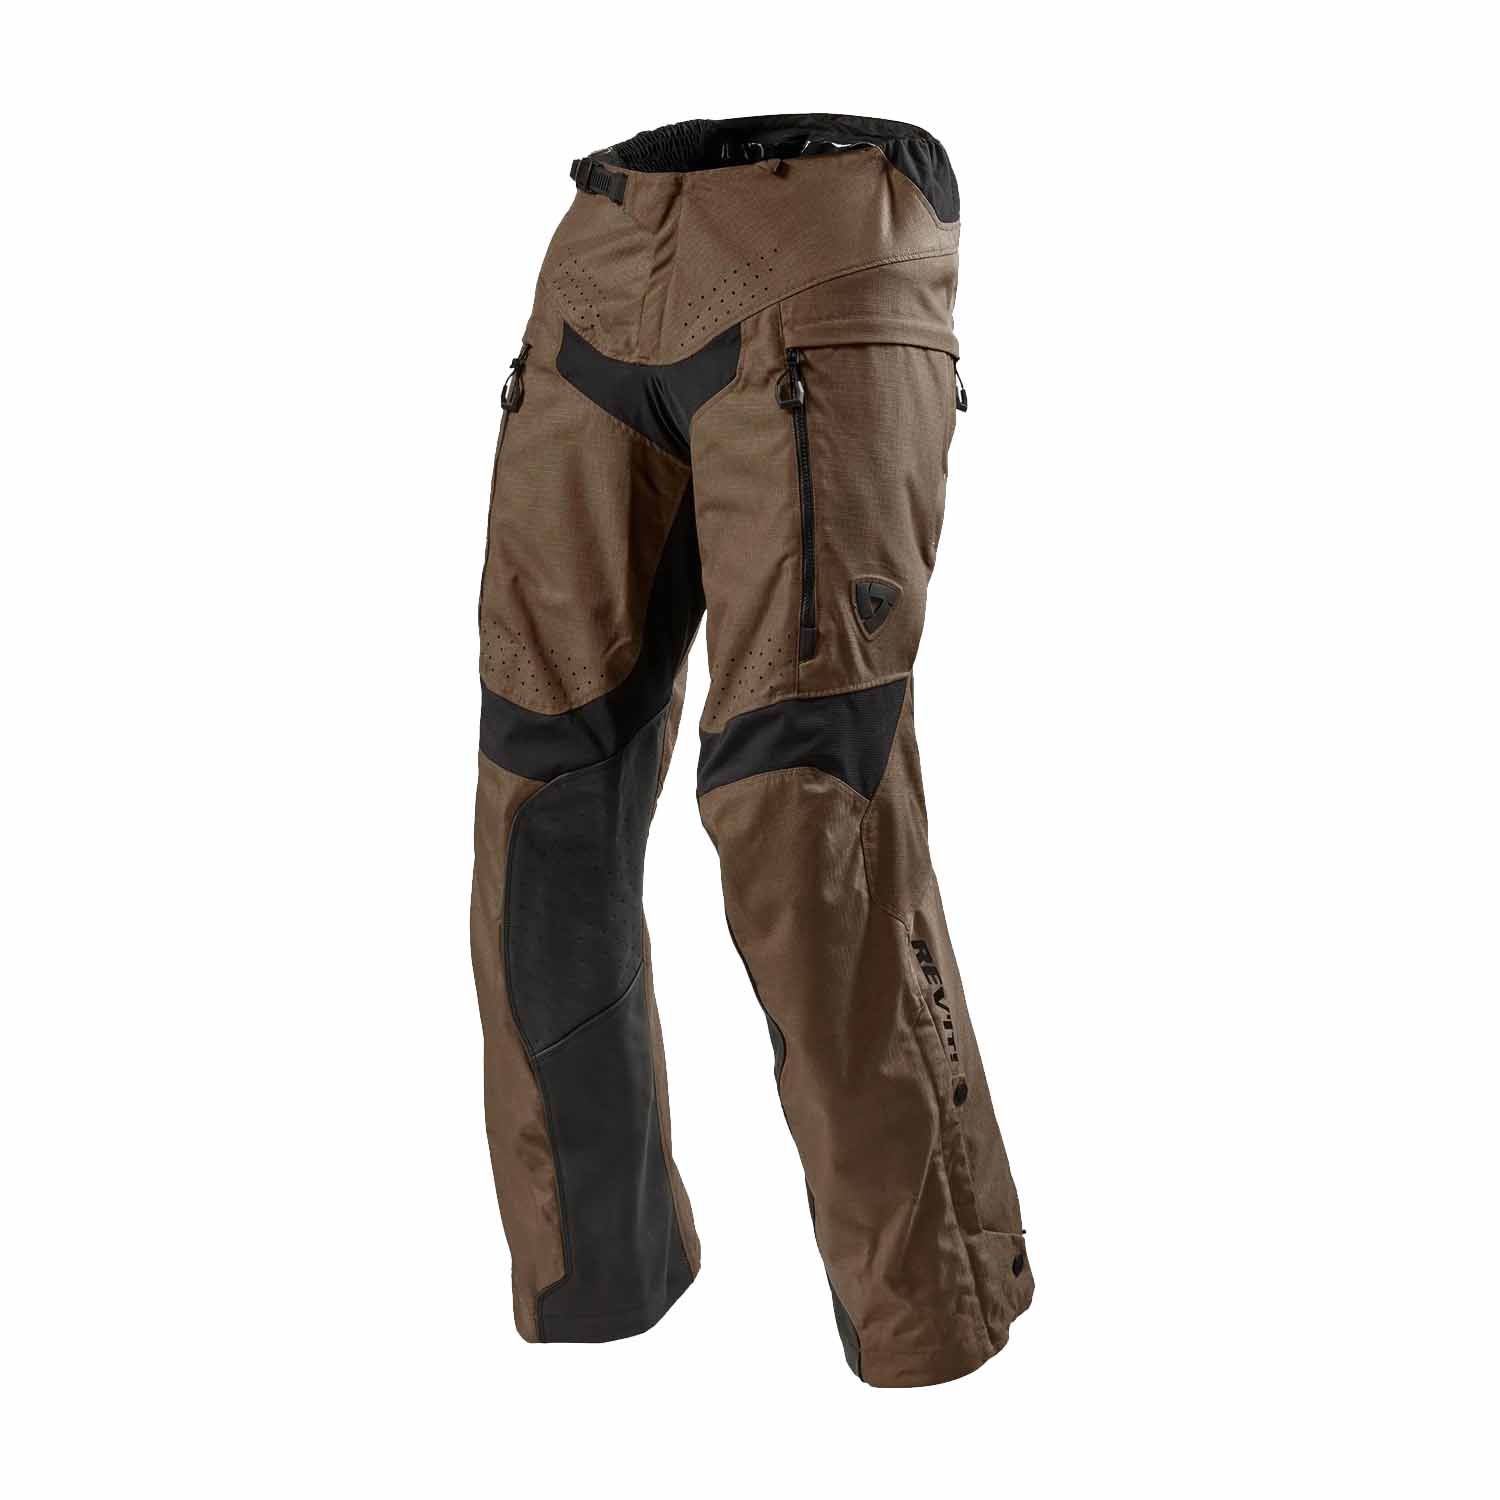 Image of EU REV'IT! Continent Pants Brown Standard Motorcycle Pants Taille 2XL